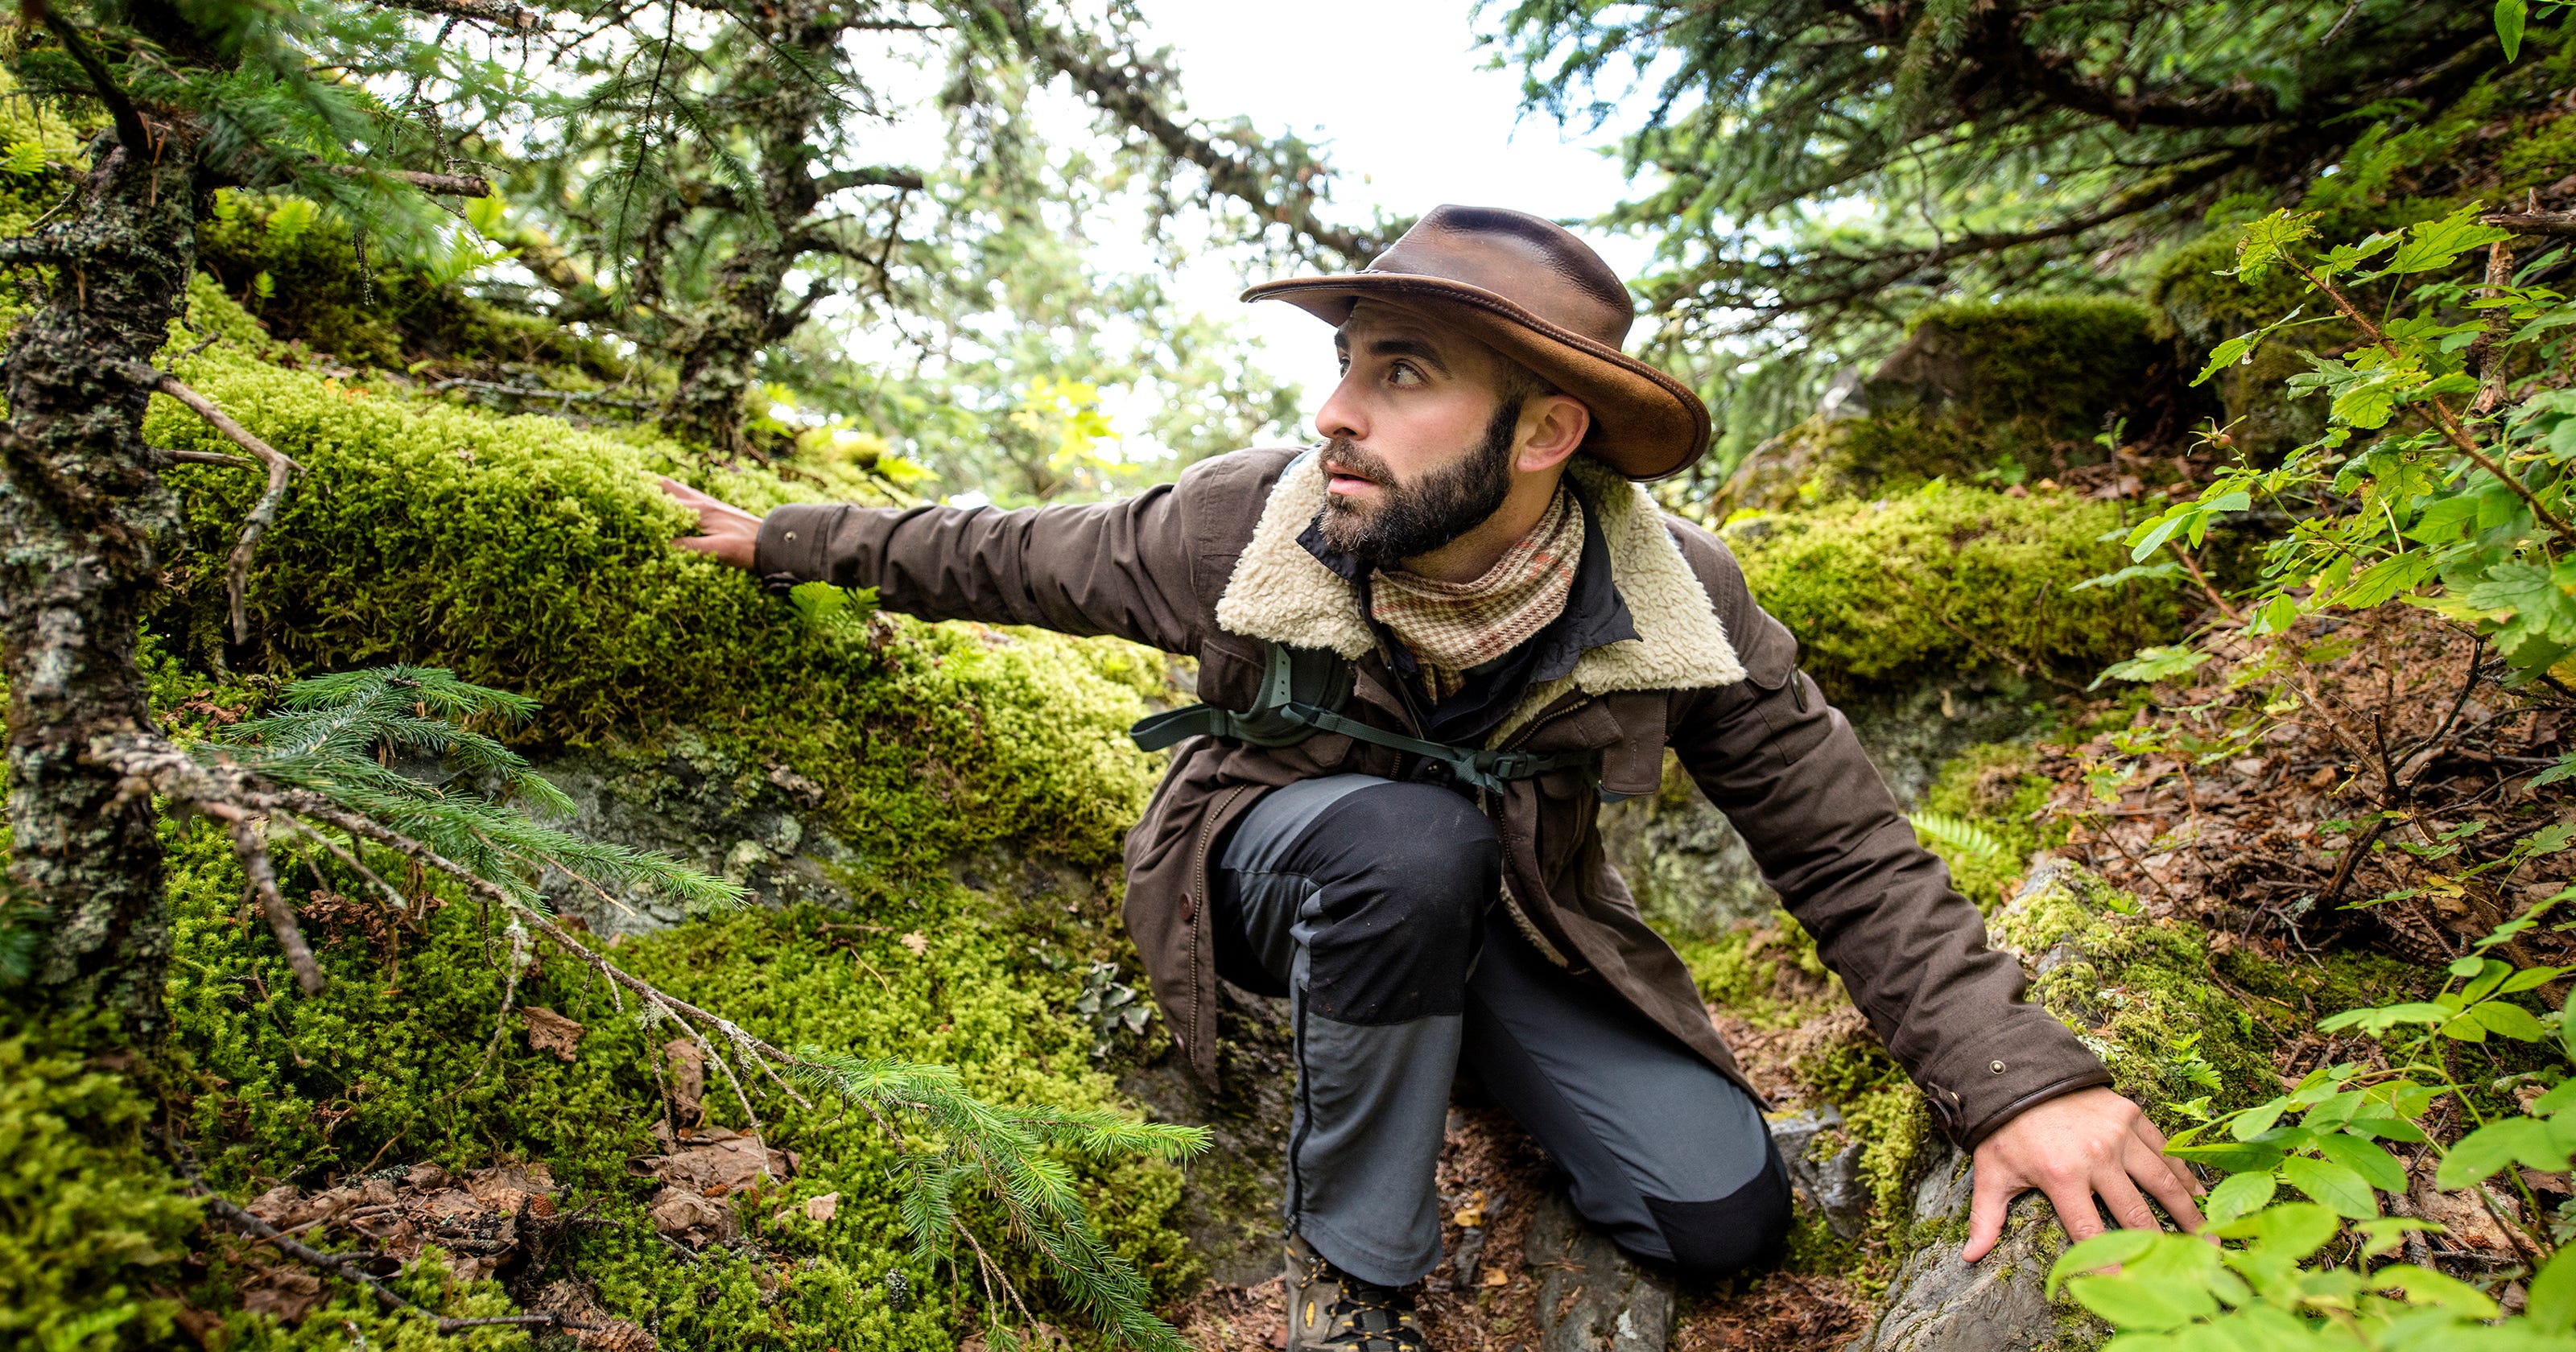 Brave Wilderness tour Coyote Peterson coming to Royal Oak